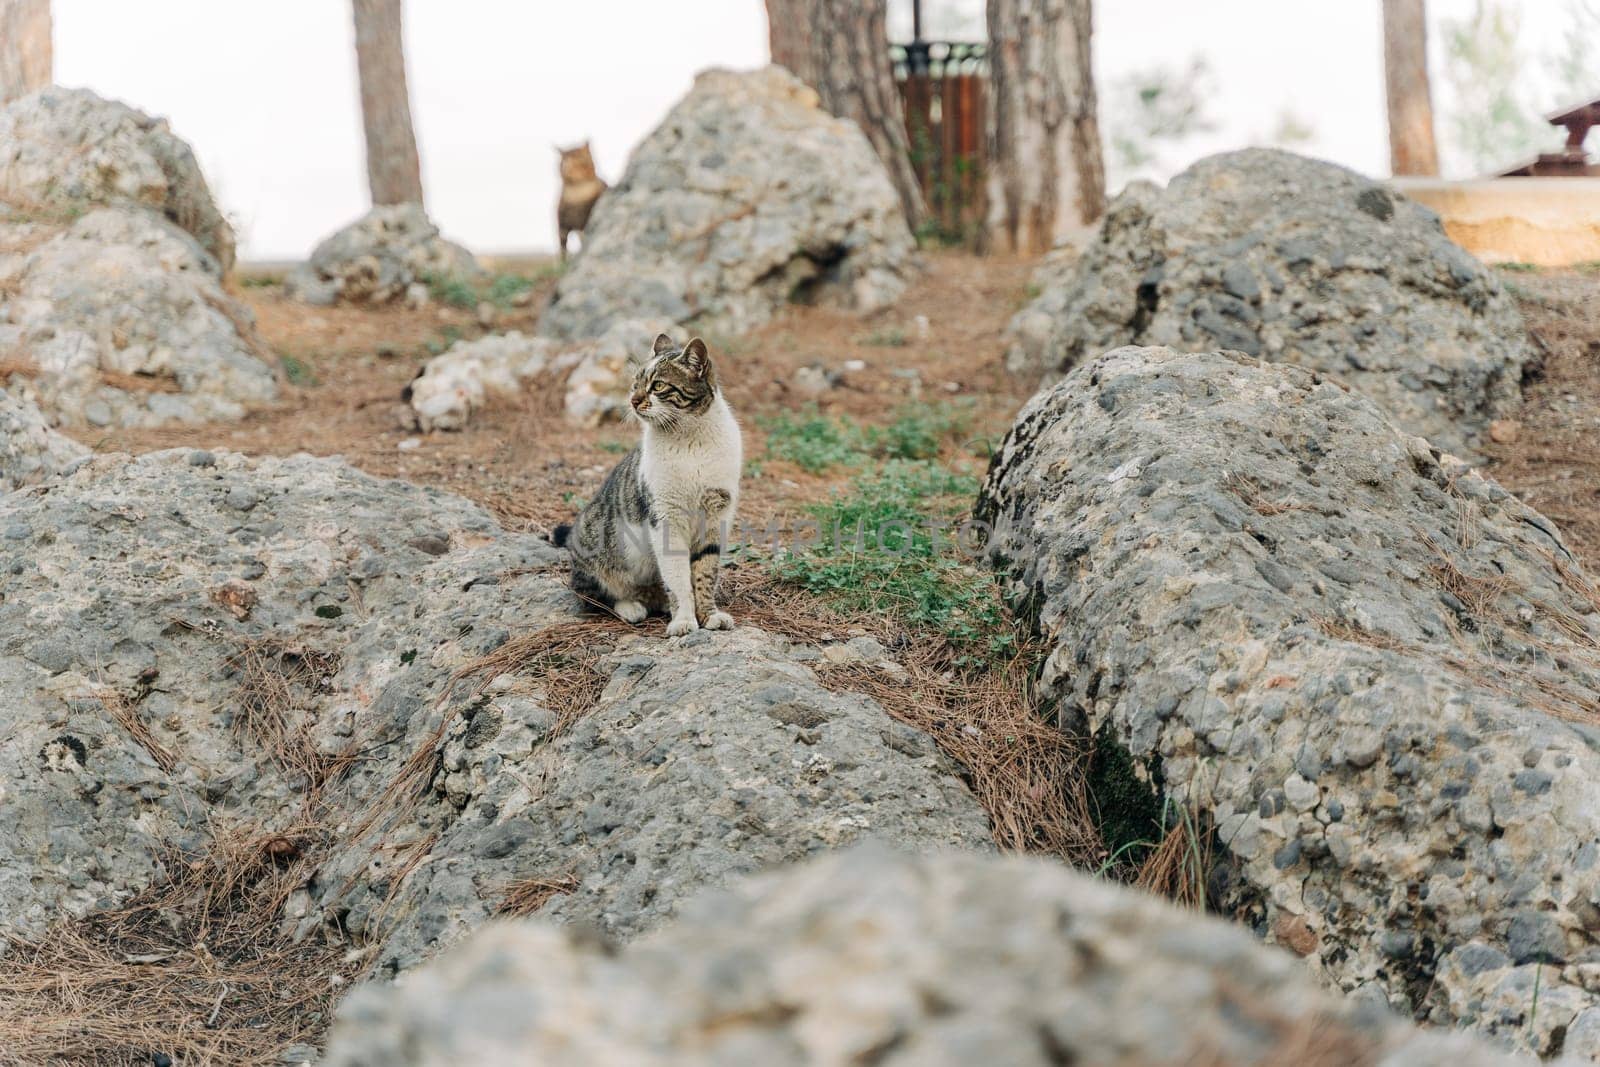 A portrait of a homeless abandoned striped stray cat surrounded by granite rocky boulders in the forest city park.